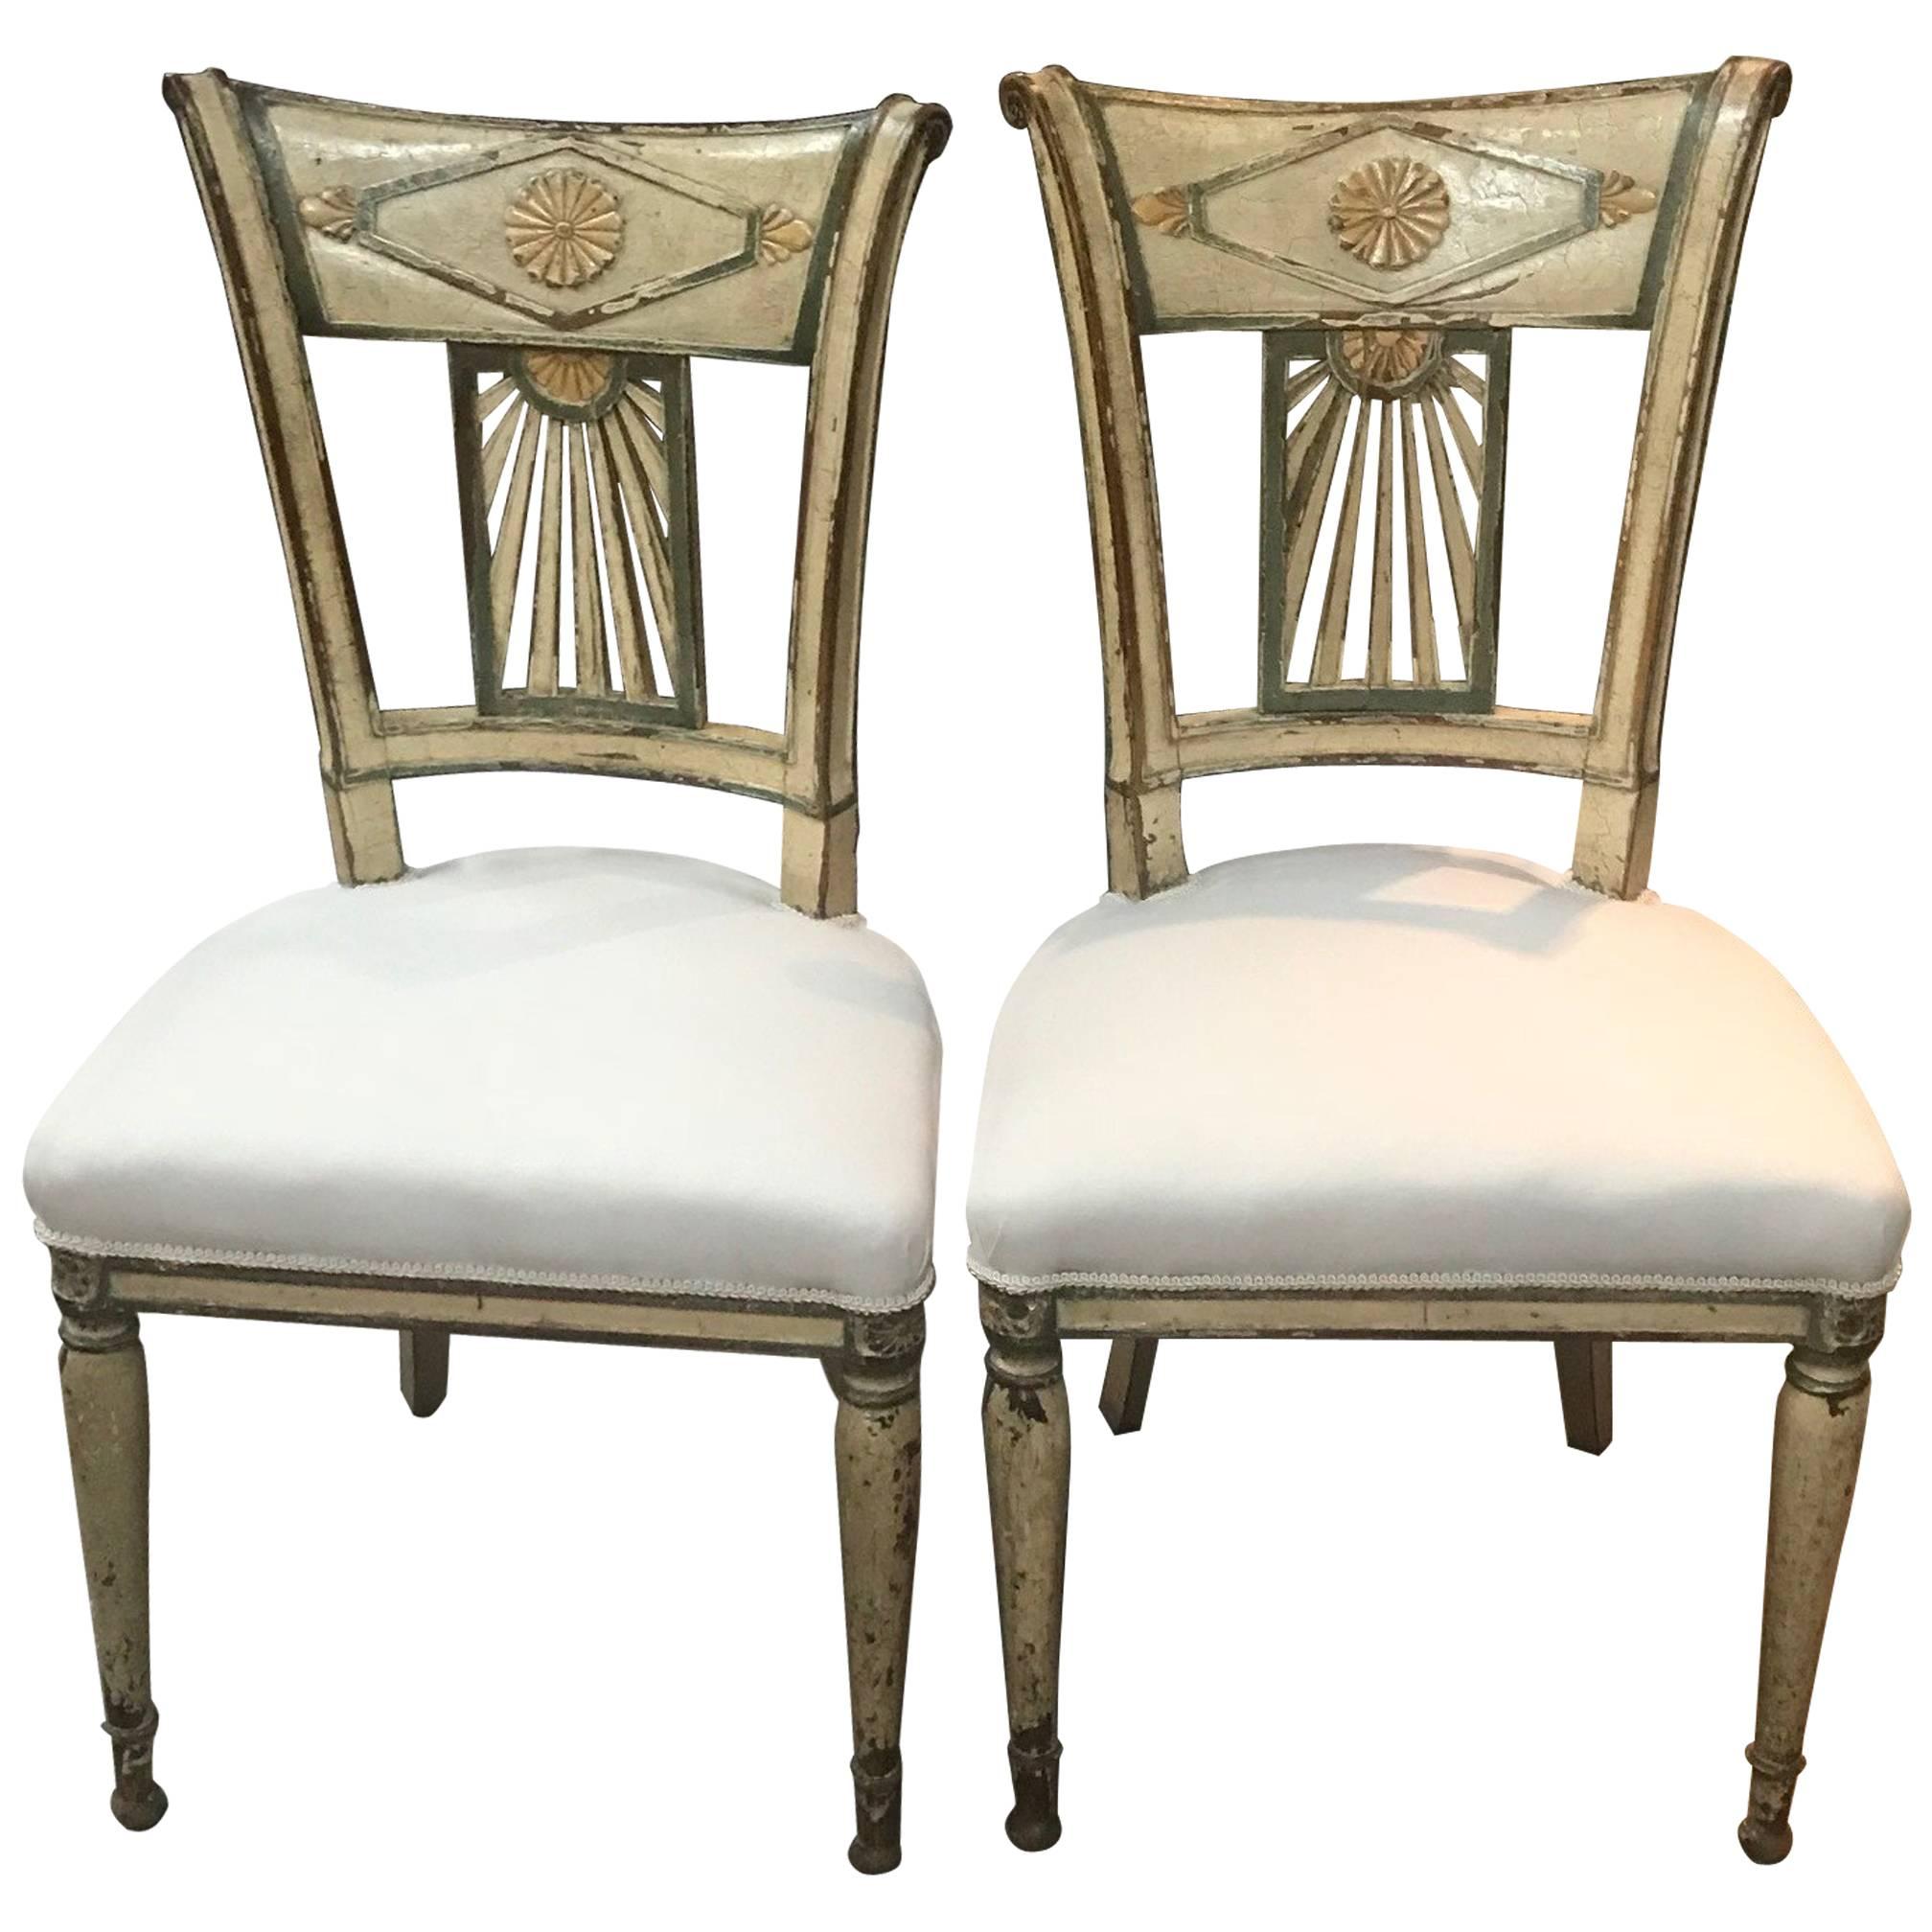 Exceptional Pair of French Period Directoire Side Chairs